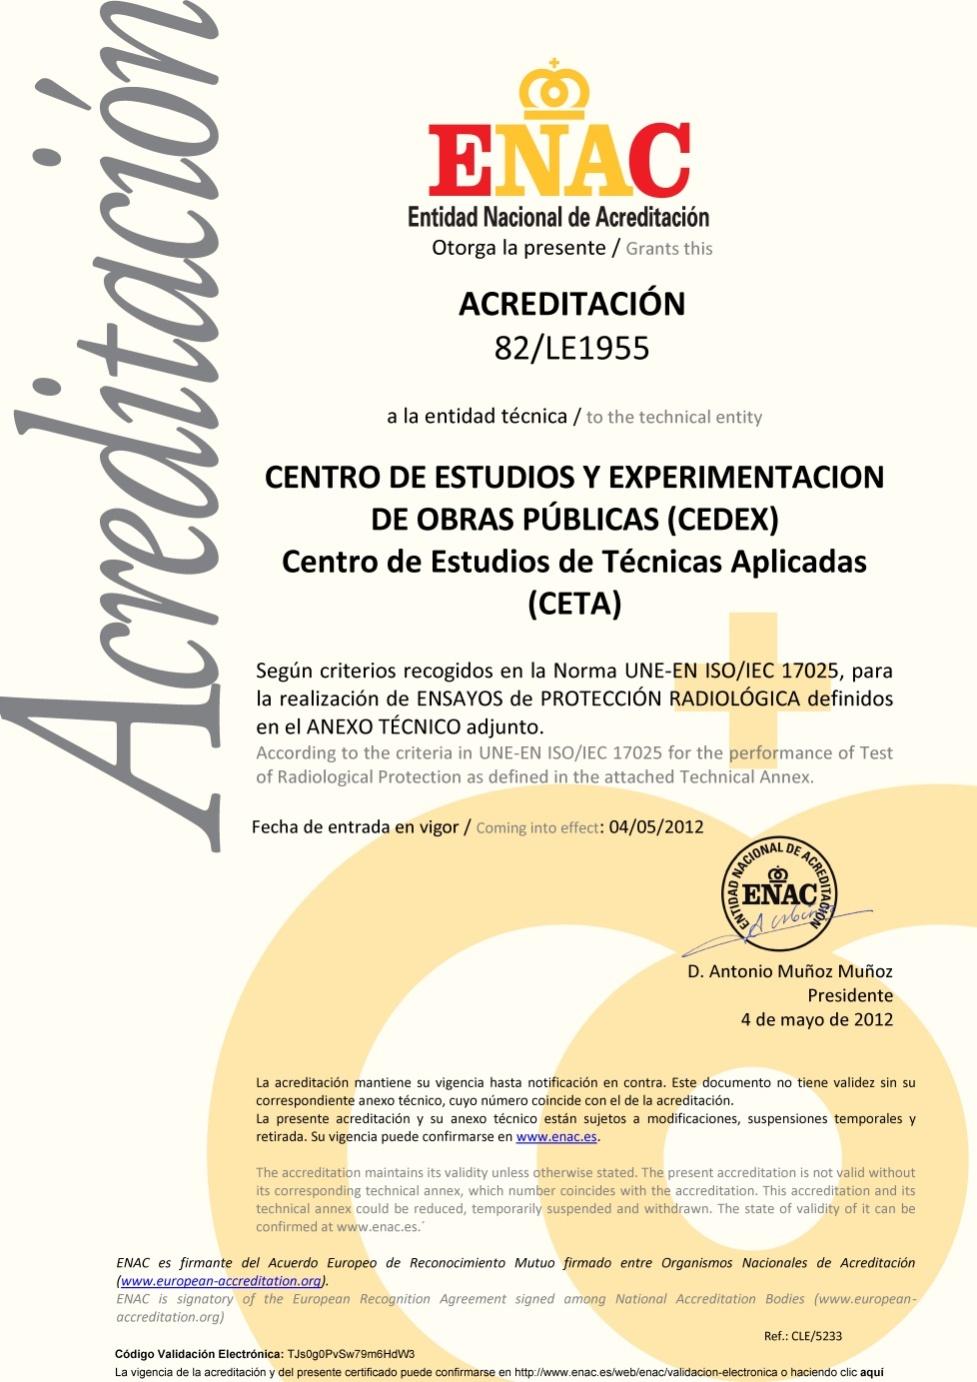 37 Certificate of Accreditation of CEDEX First cycle (four years) Initial audit: March 2012. Gross beta. First follow-up : June 2013. Direct tritium.